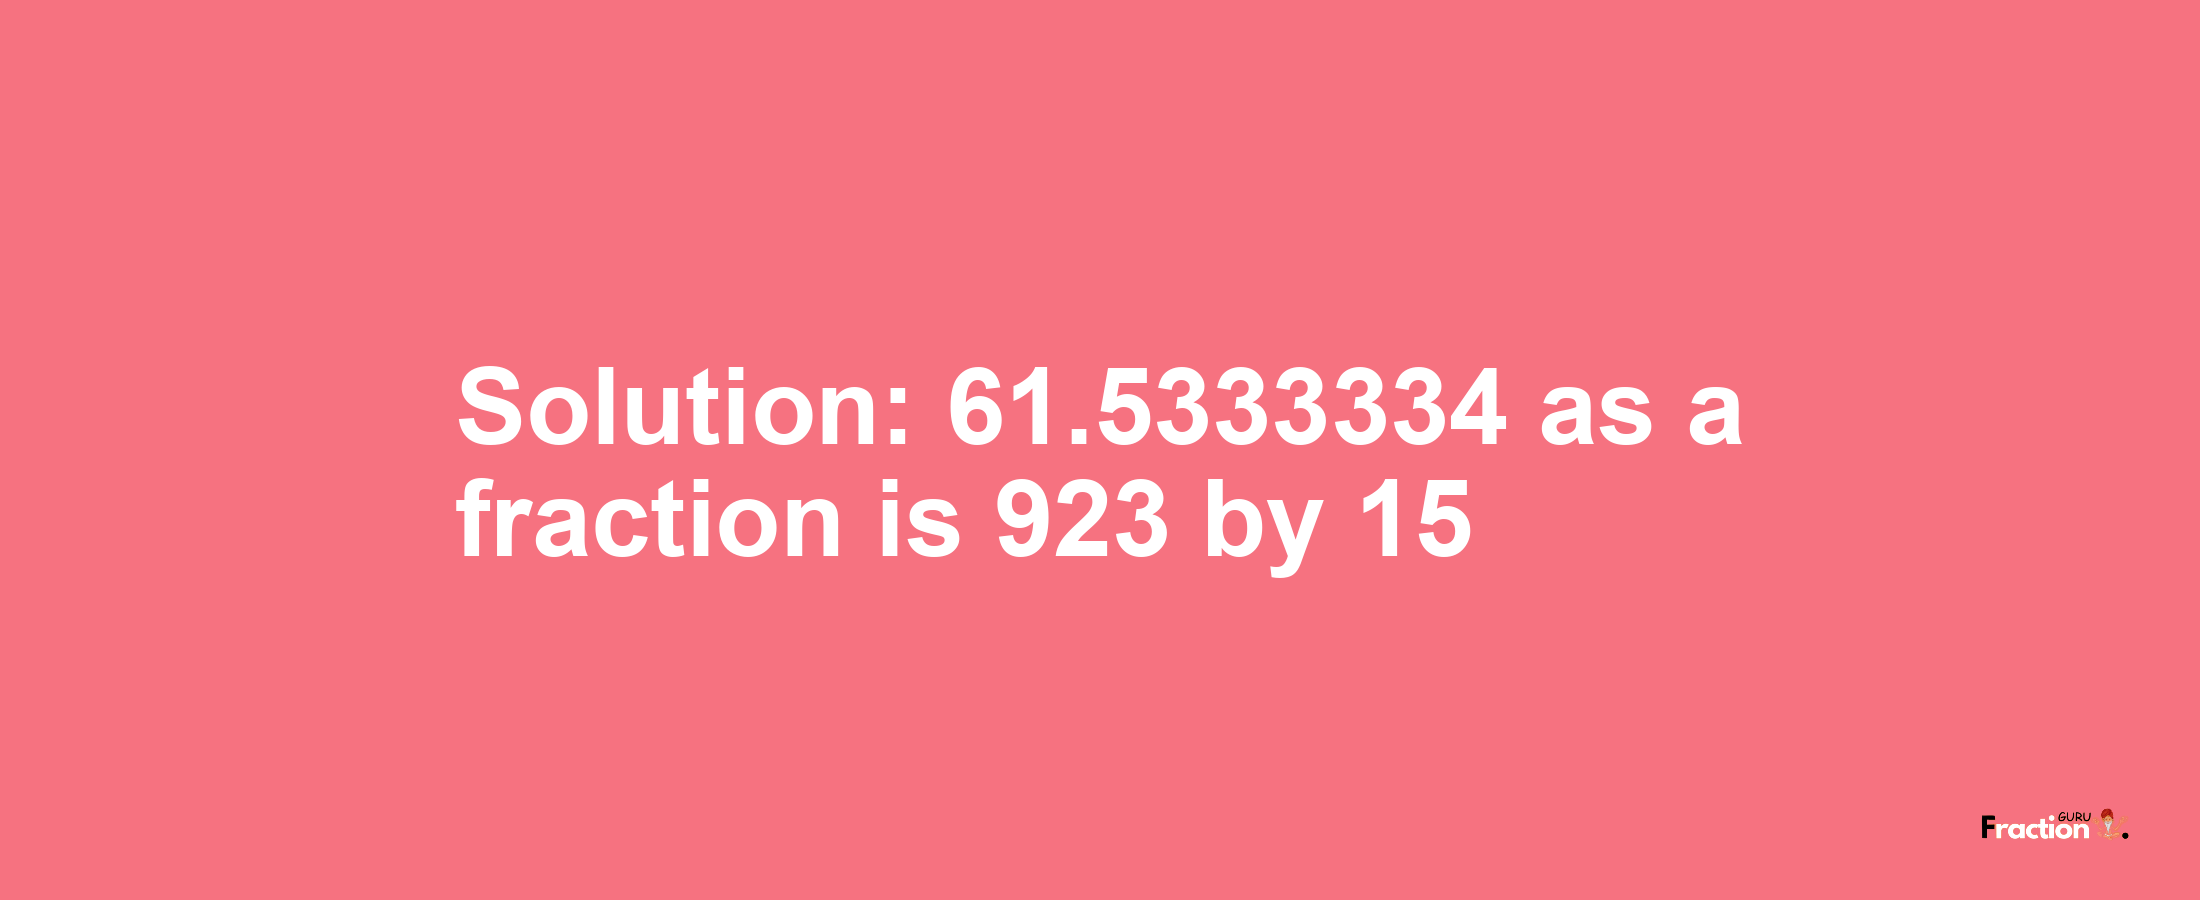 Solution:61.5333334 as a fraction is 923/15